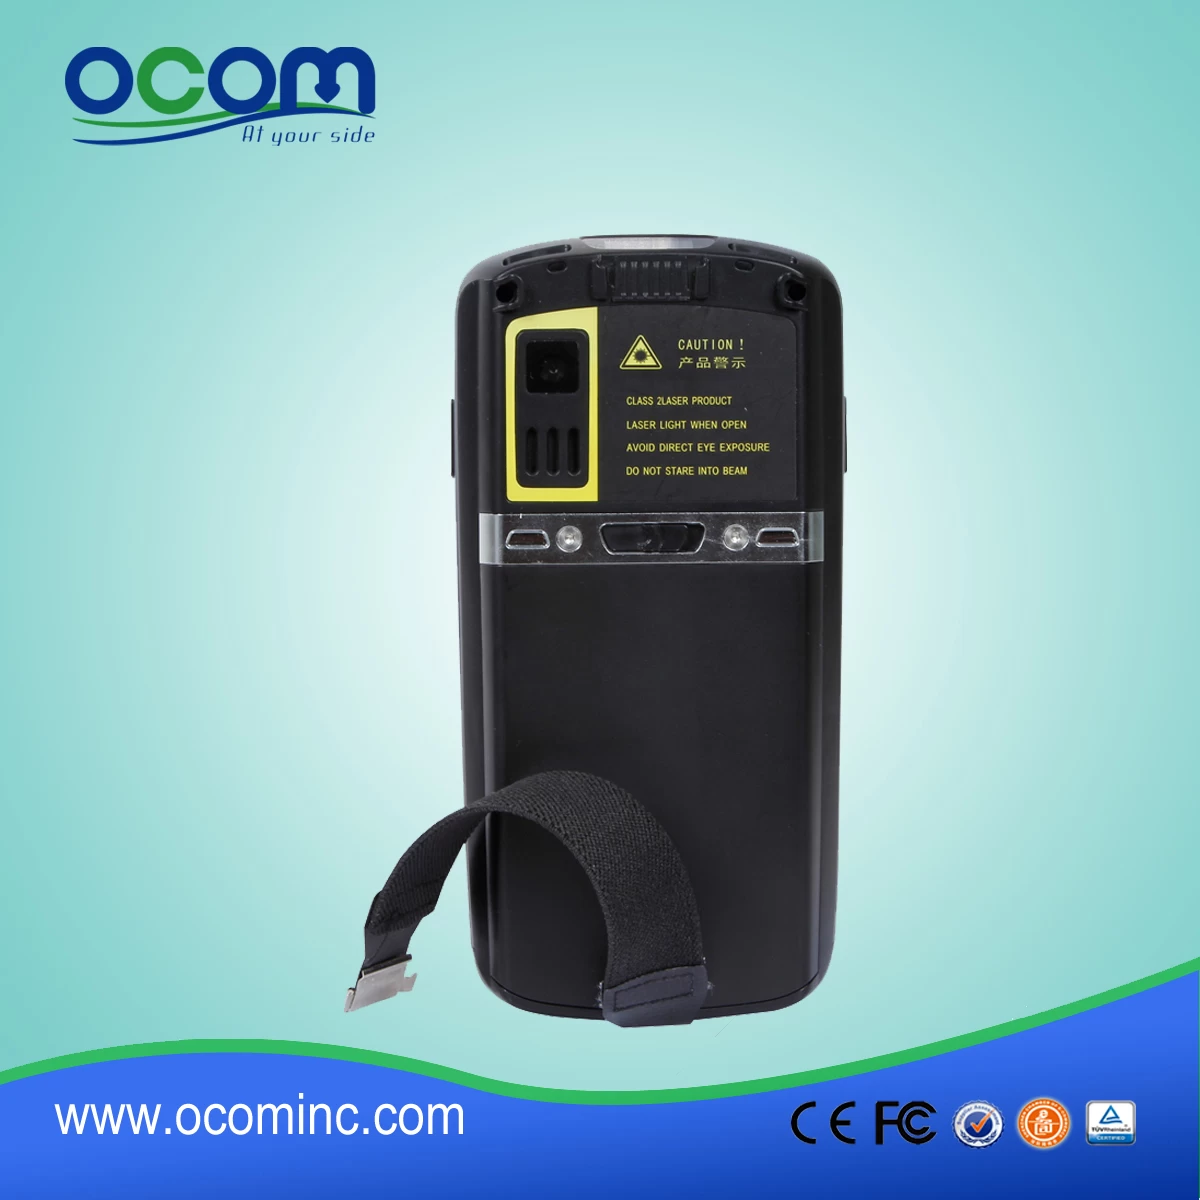 Multi-functional WiFi Handheld Rugged Data Collector-OCBS-D008